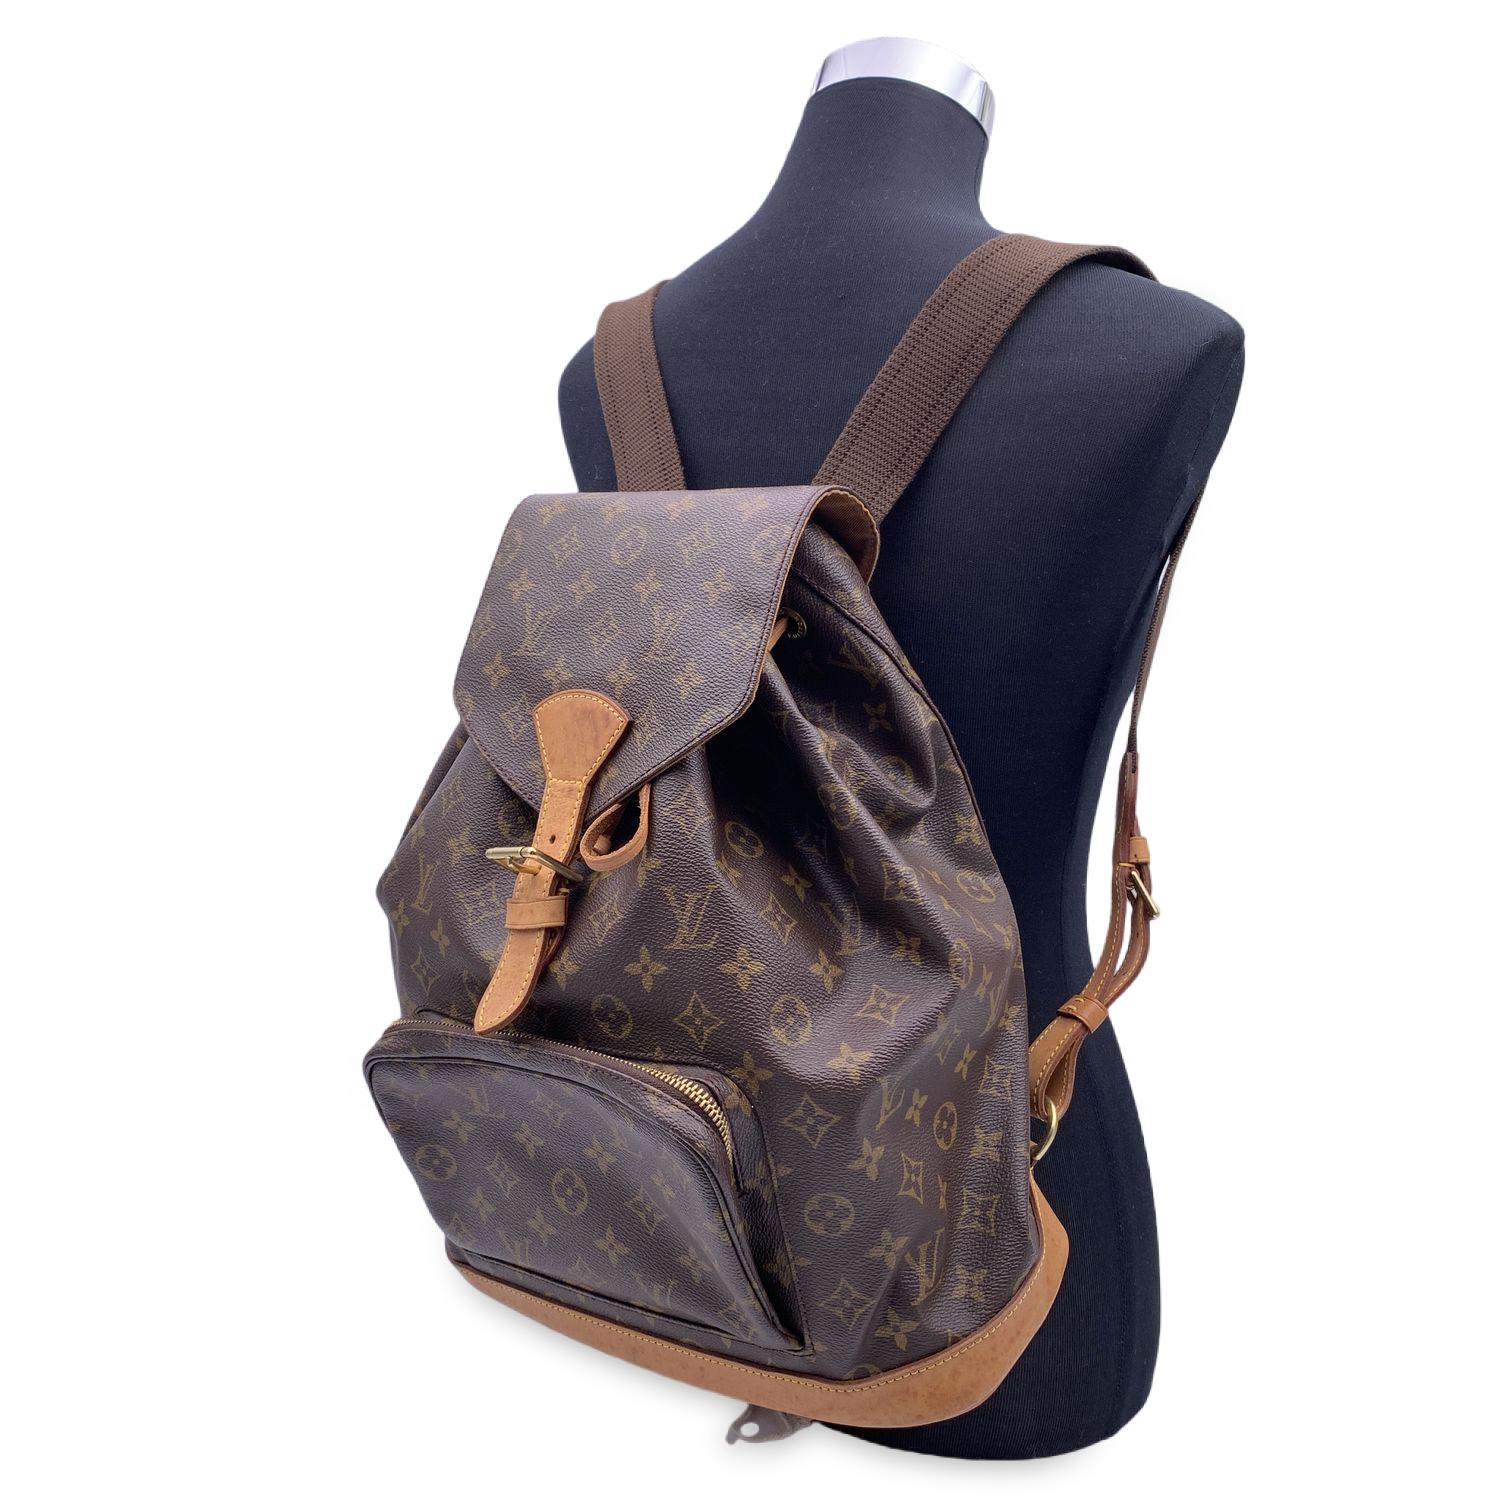 Casual yet sophisticated at the same time Louis Vuitton 'Montsouris GM' Backpack bag . Top is closed with flap with buckle closure and drawstring. 1 front zip pocket.Long and adjustable shoulder straps with gold metal hardware. Brown canvas